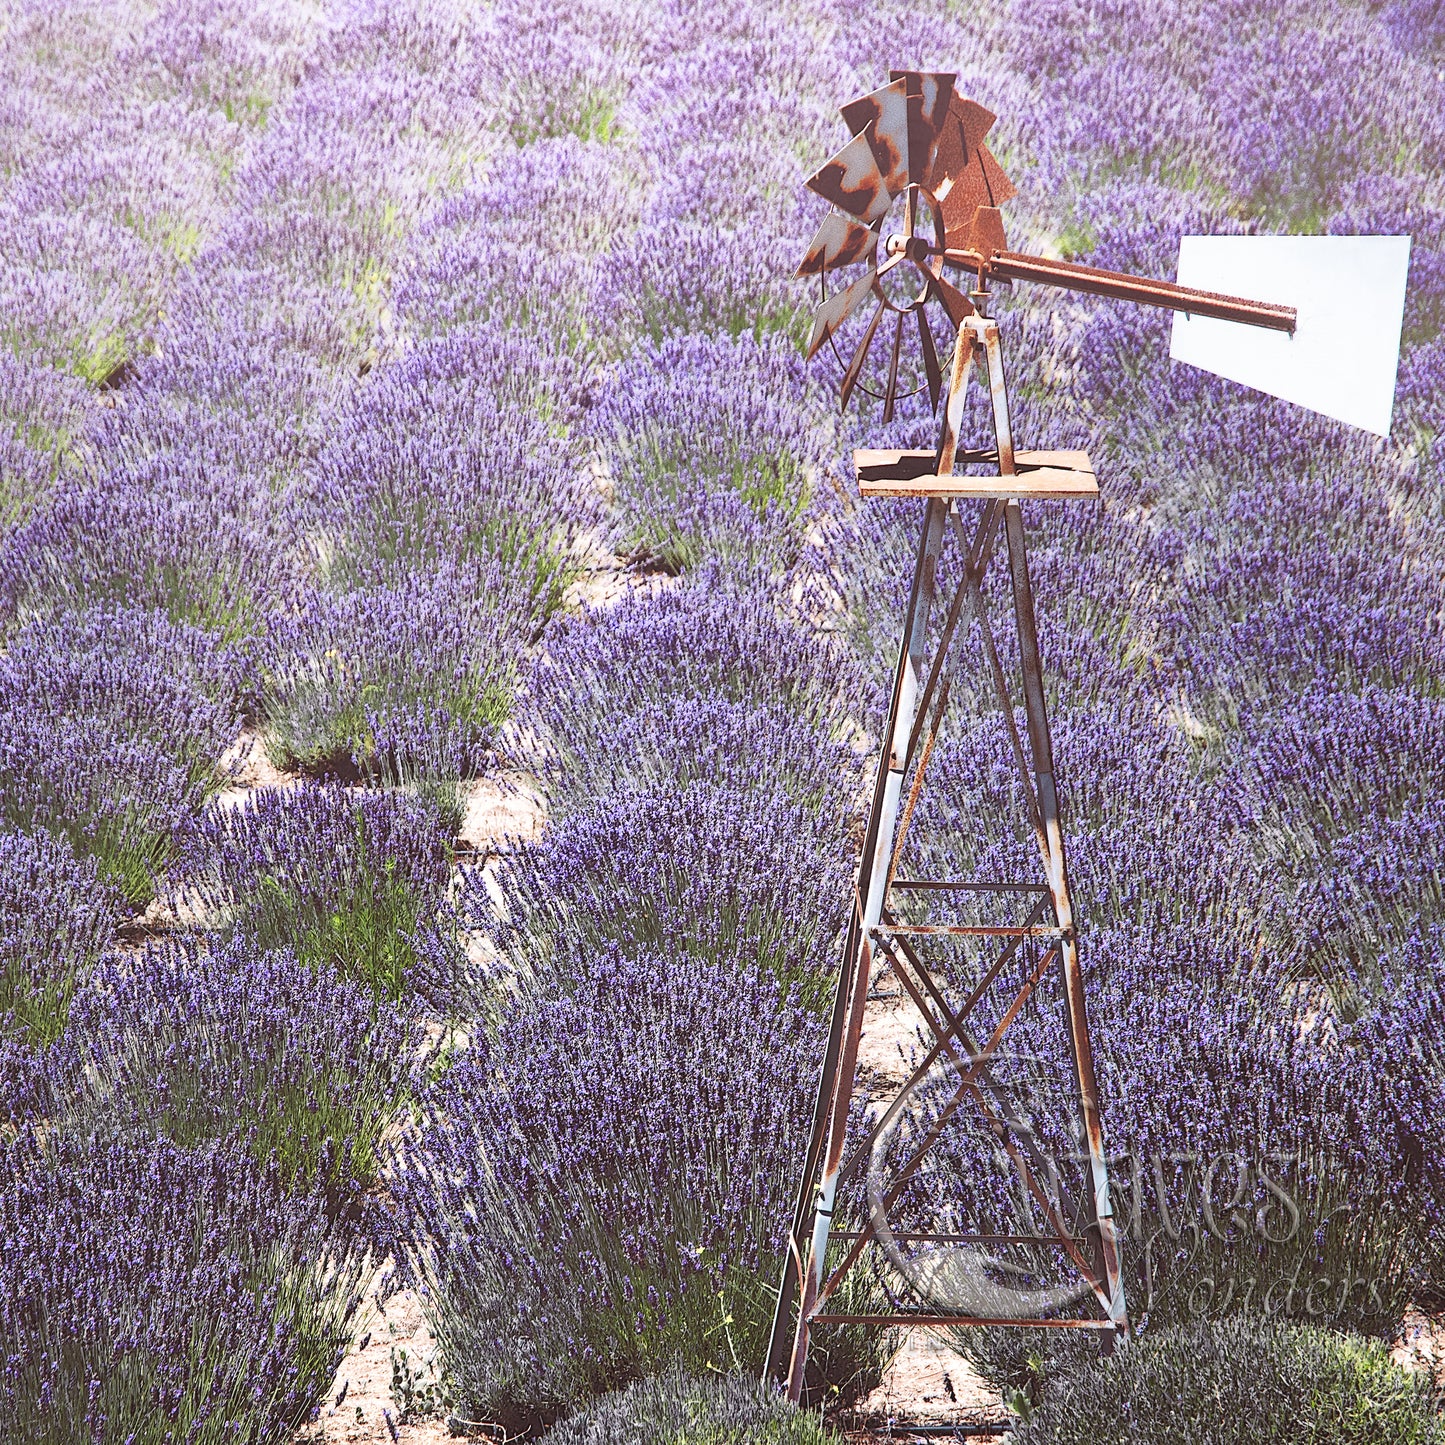 a windmill in a field of lavender flowers